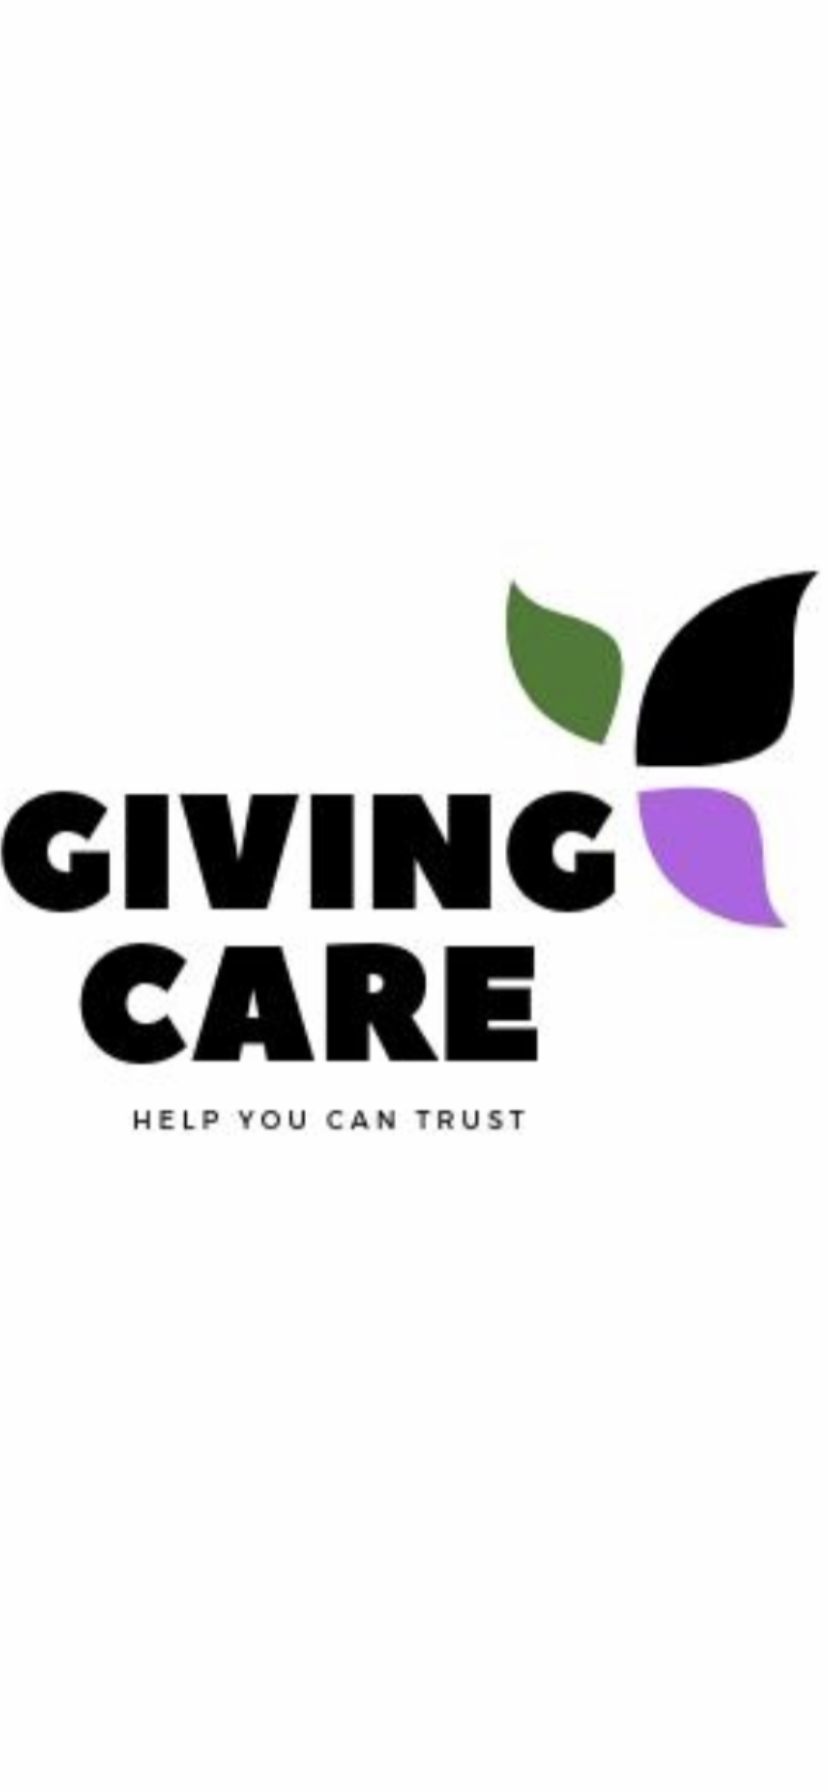 Giving Care